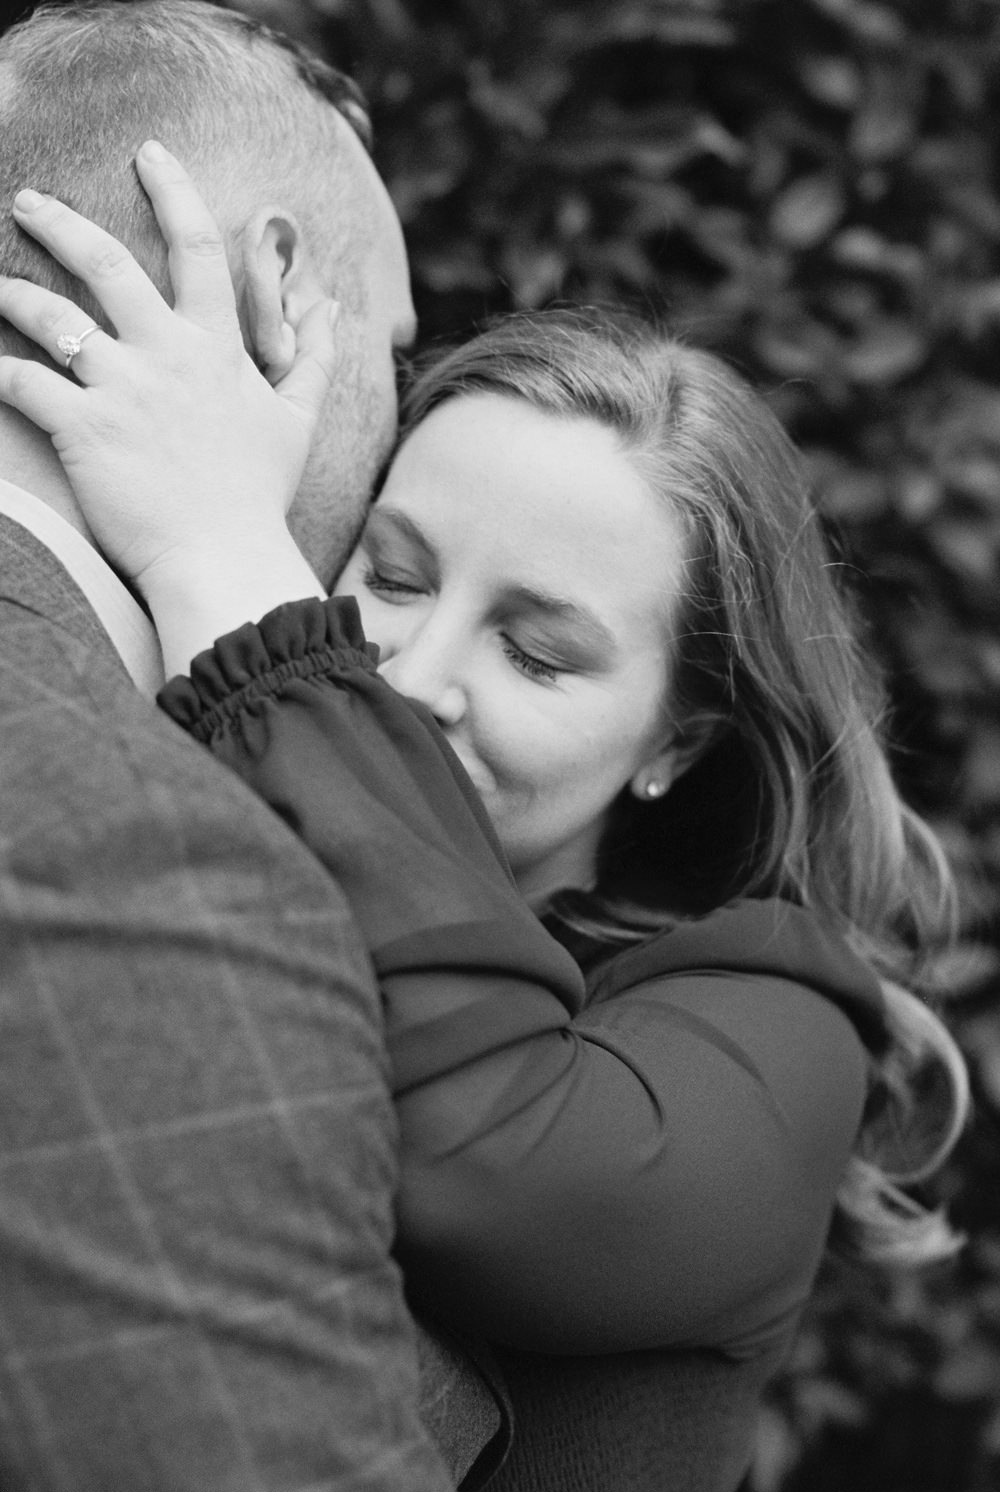 prospect heights brooklyn engagement session photos by Mary Dougherty